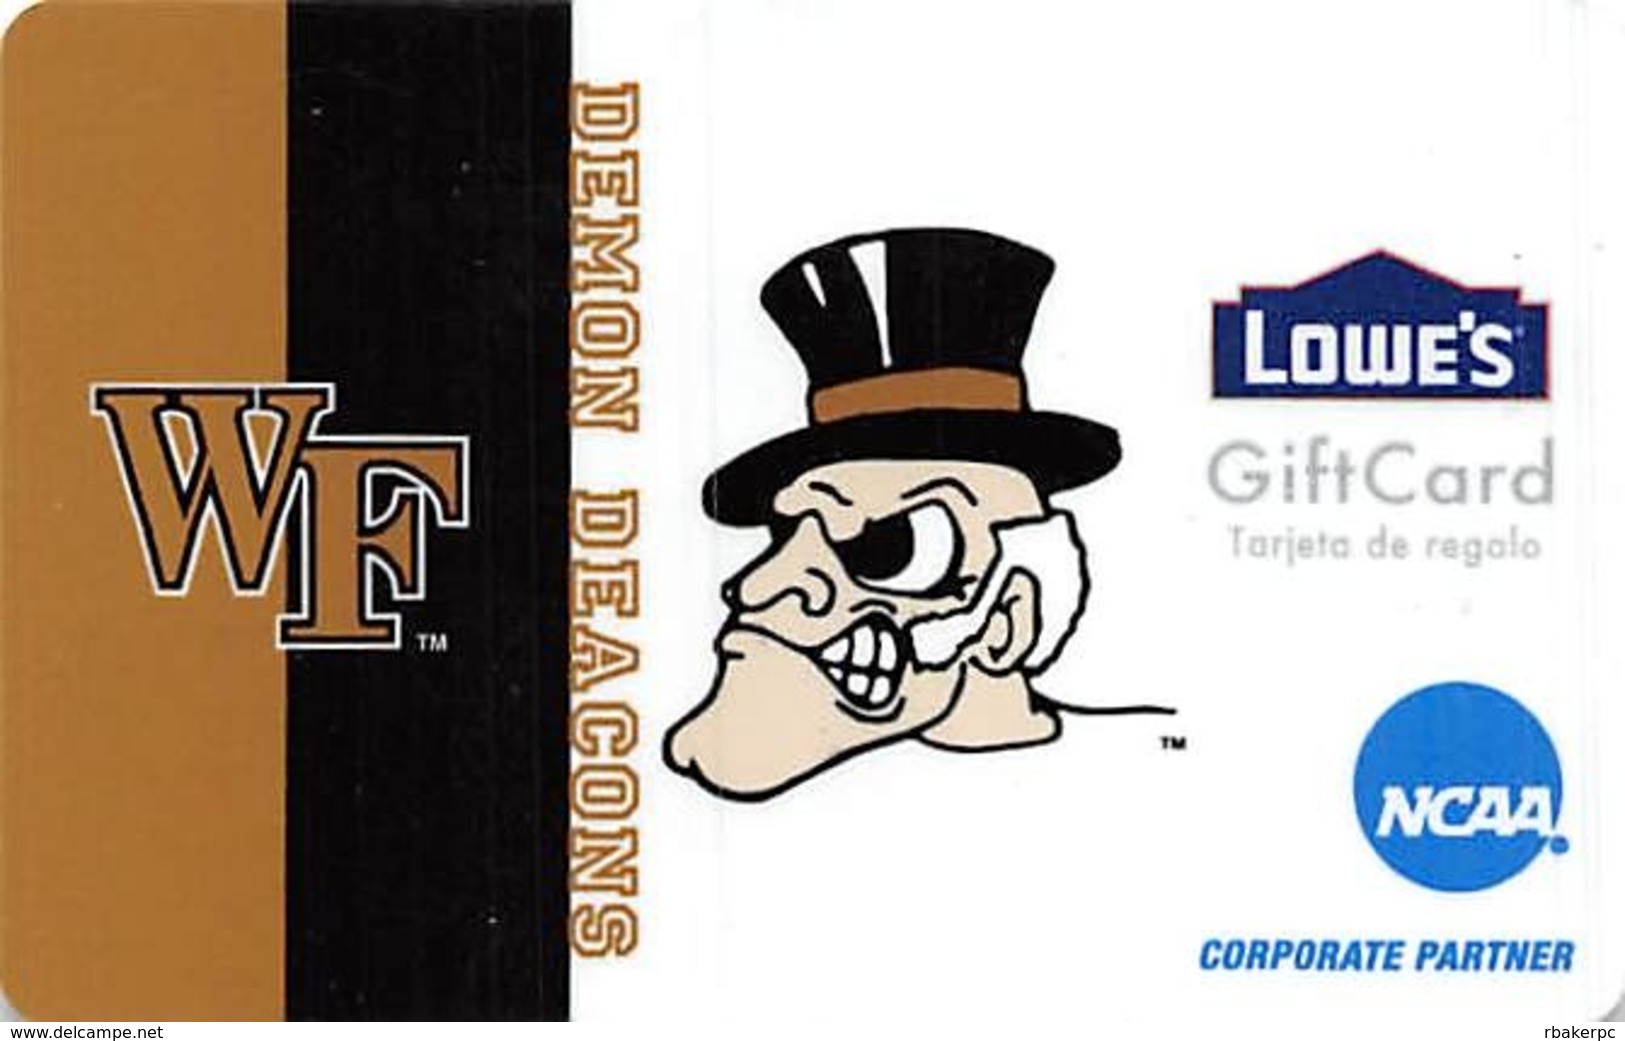 Lowes NCAA Gift Card - WF Demon Deacons - Gift Cards